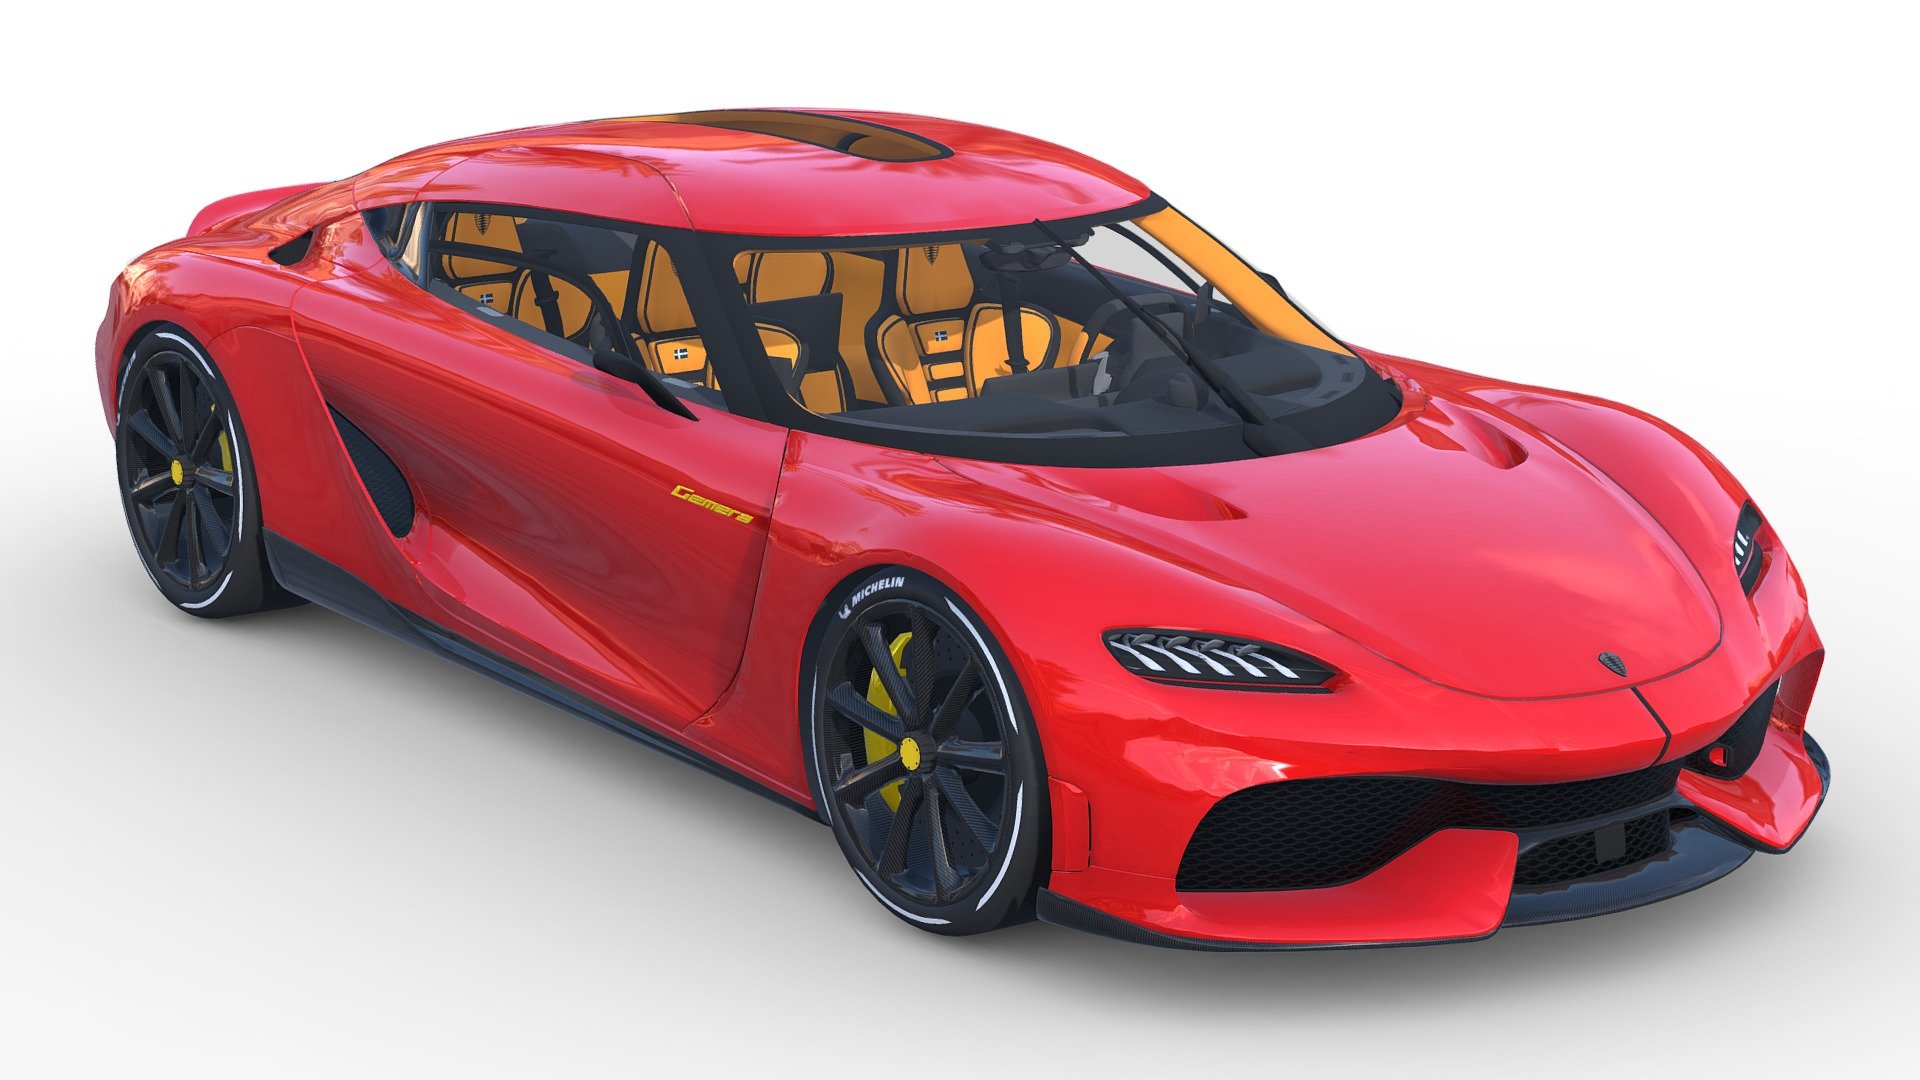 Could you please consider liking and subscribing to my account. Your support would mean a lot to me. Thank you! - Supercar Gemera for 400 sub - Download Free 3D model by zizian 3d model